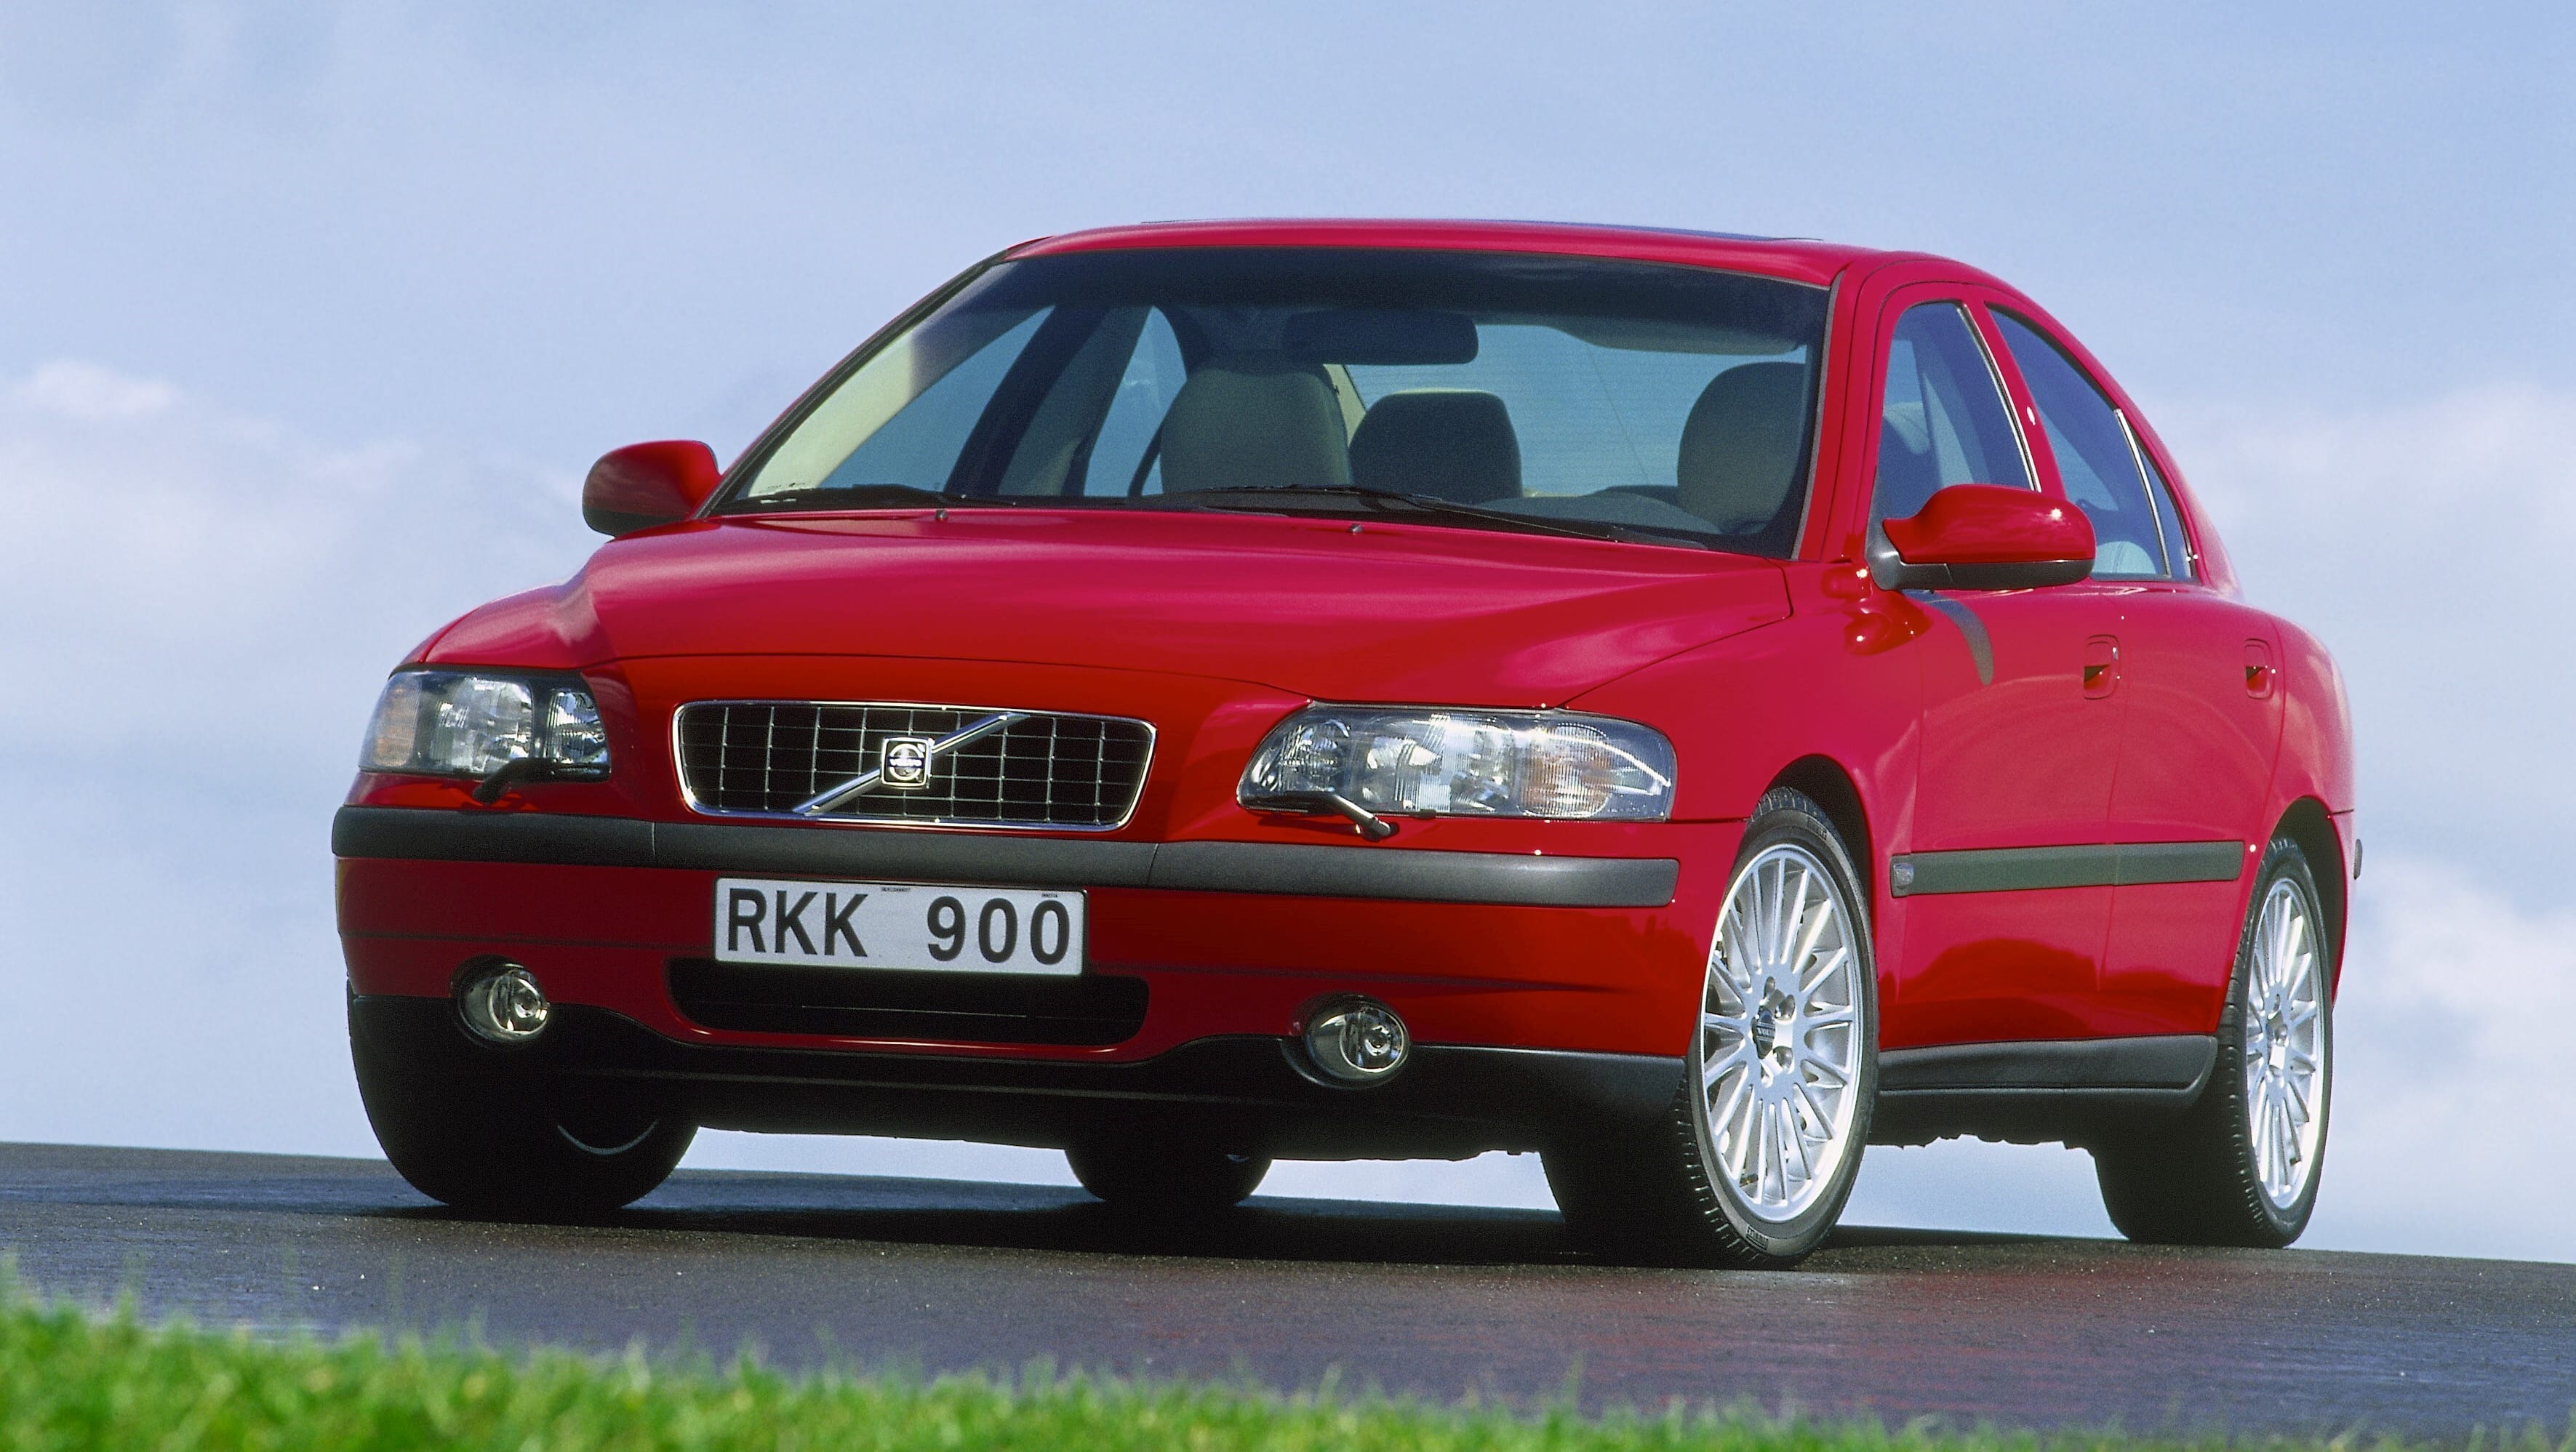 Volvo recalls 460,000 cars worldwide for potentially deadly airbags